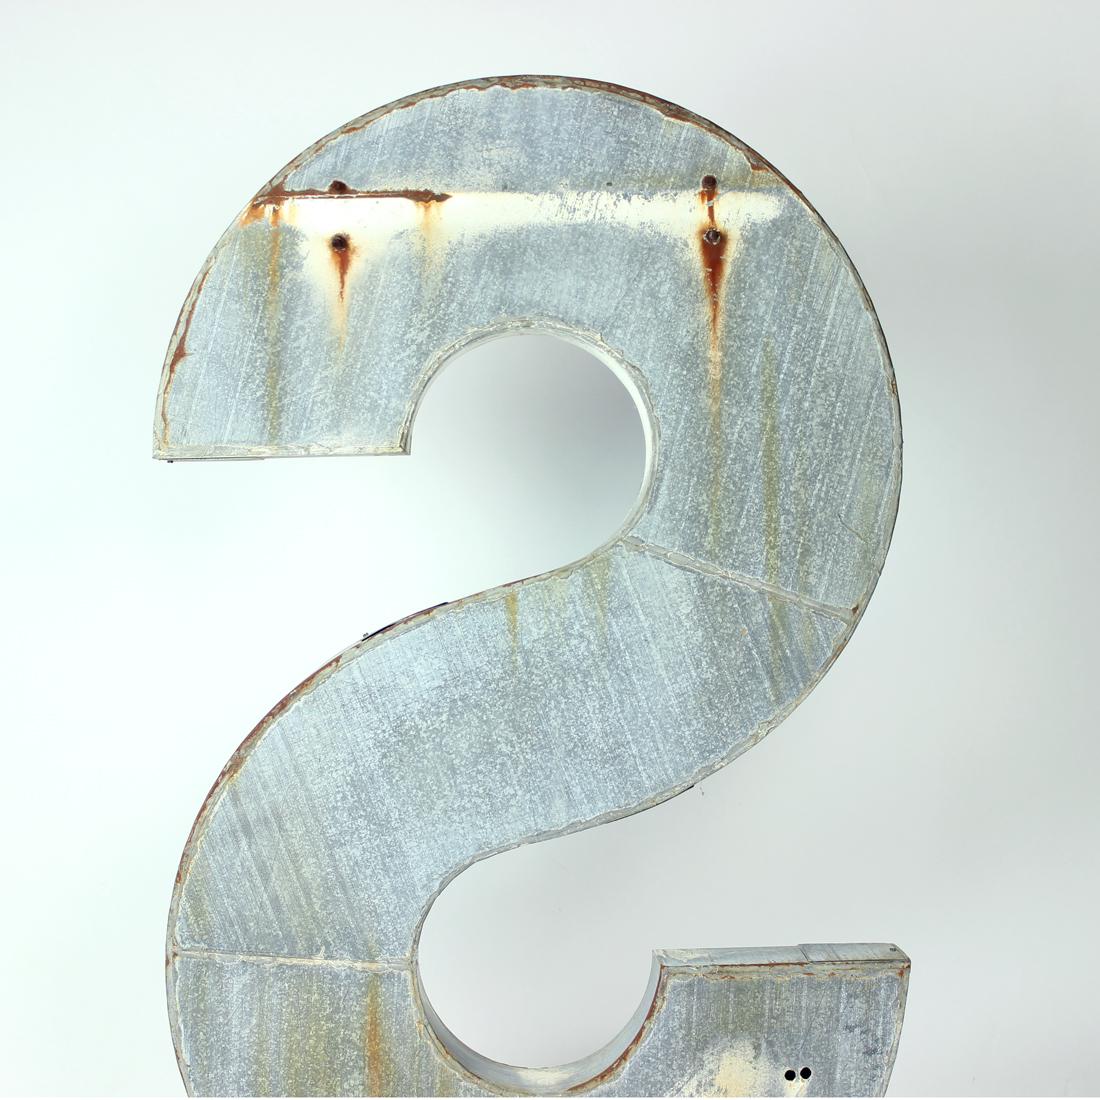 Amazing piece of vintage wall art. An industrial letter made of zinc sheet. Original sign used until recently in a factory in Czechoslovakia. Produced in 1950s. The letter is huge, 142cm high. It is definitely a statement whereever this piece